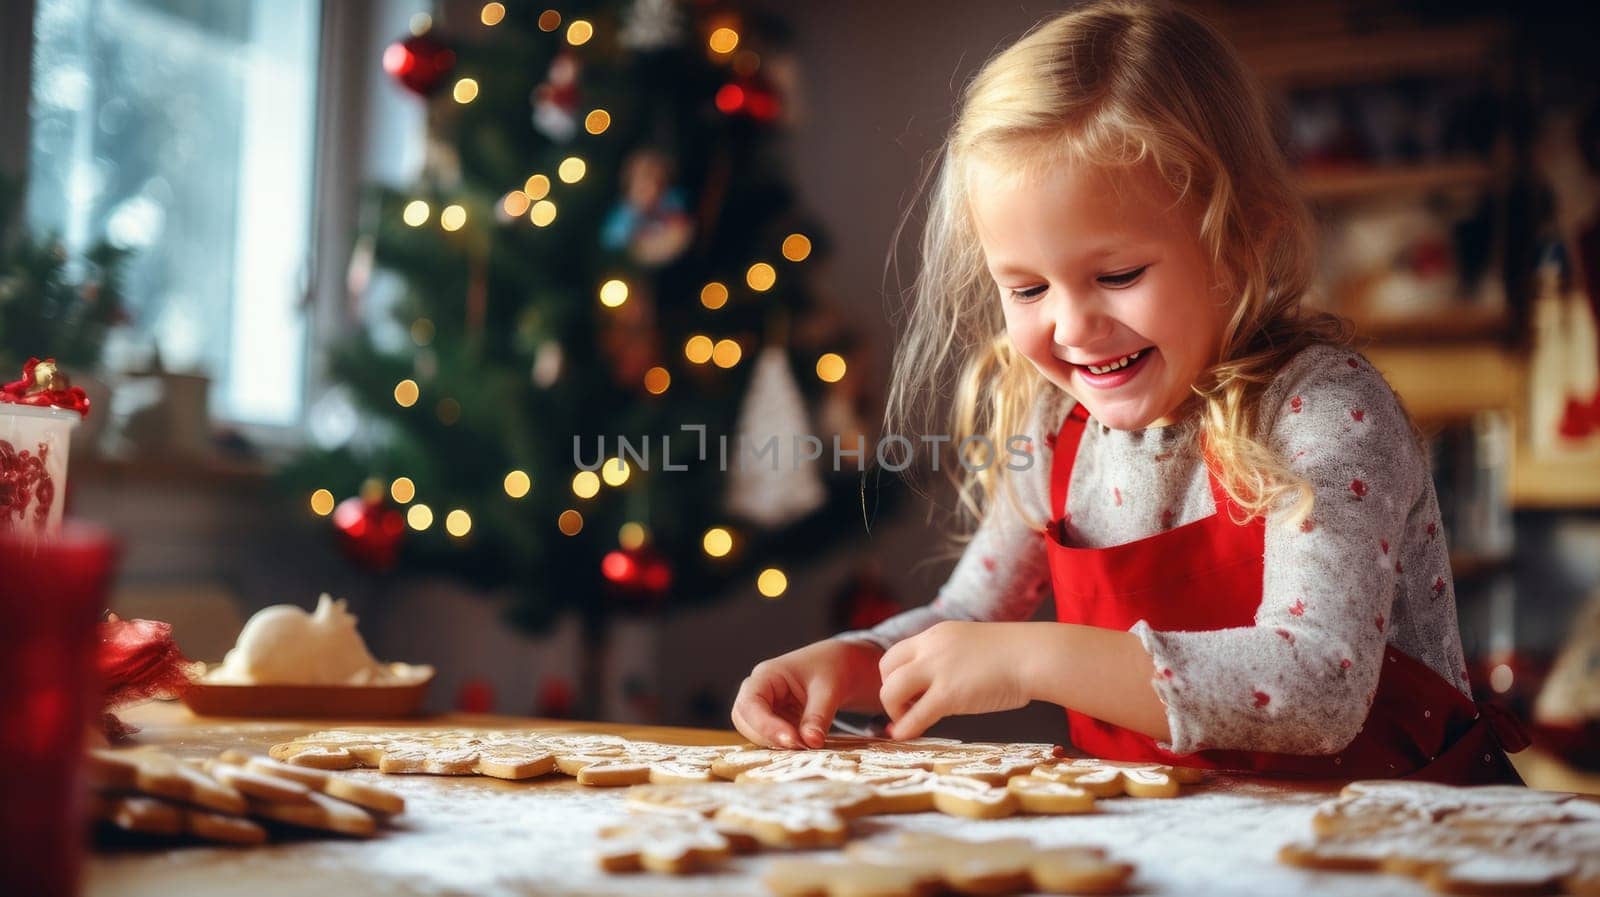 Smiling child decorating Christmas cookies. Merry Christmas and Happy New Year concept. by Alla_Yurtayeva